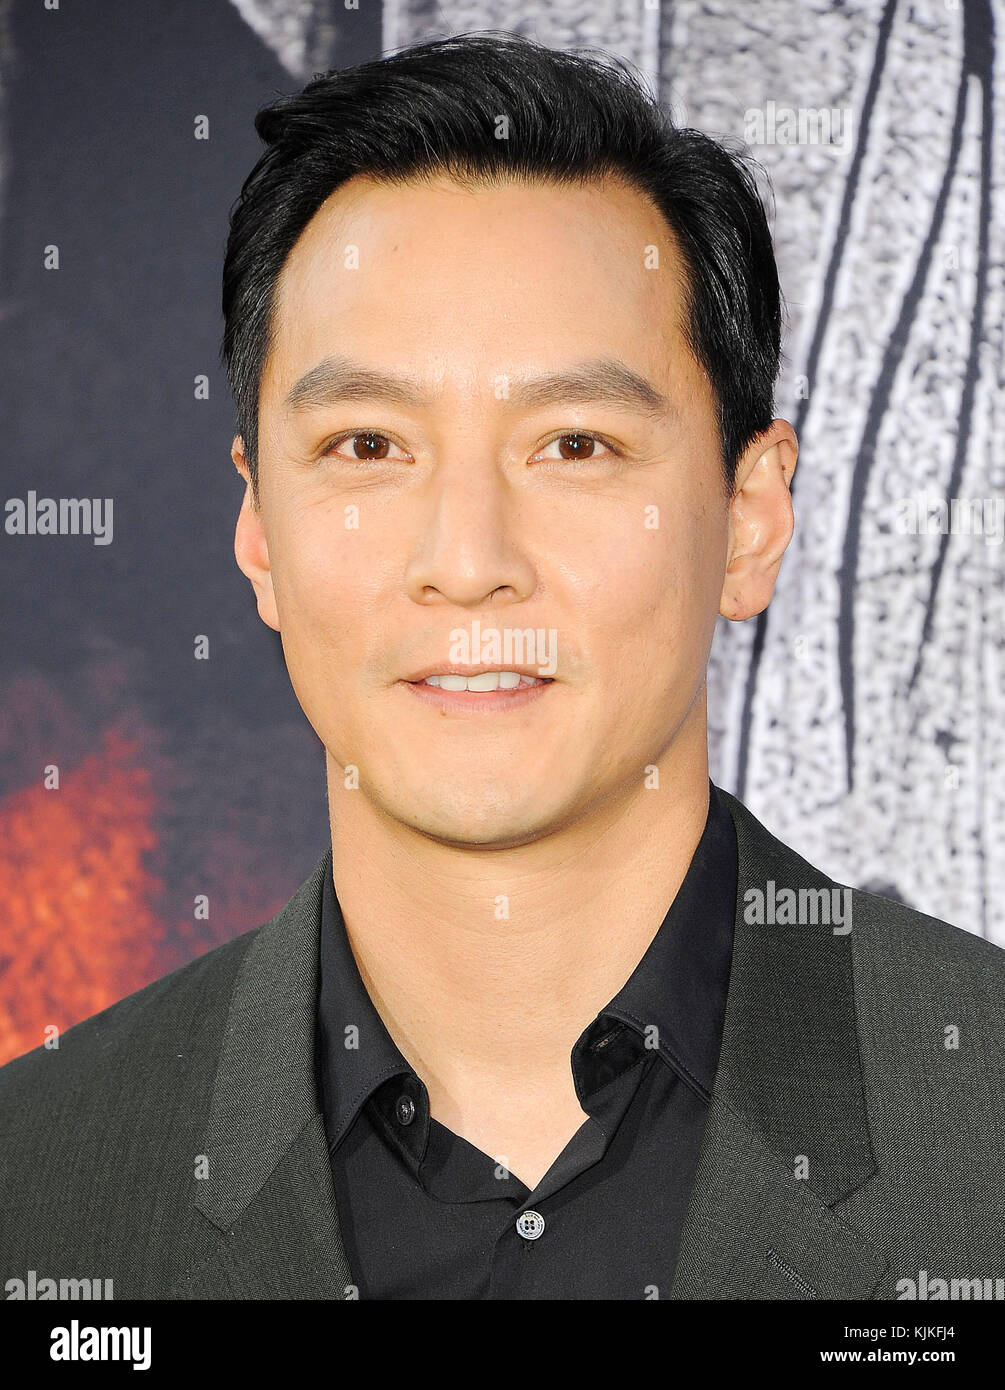 HOLLYWOOD, CA - JUNE 06: Daniel Wu Thomas Guest arrives at the Premiere Of Universal Pictures' 'Warcraft' at TCL Chinese Theatre IMAX on June 6, 2016 in Hollywood, California.   People:  Daniel Wu Stock Photo